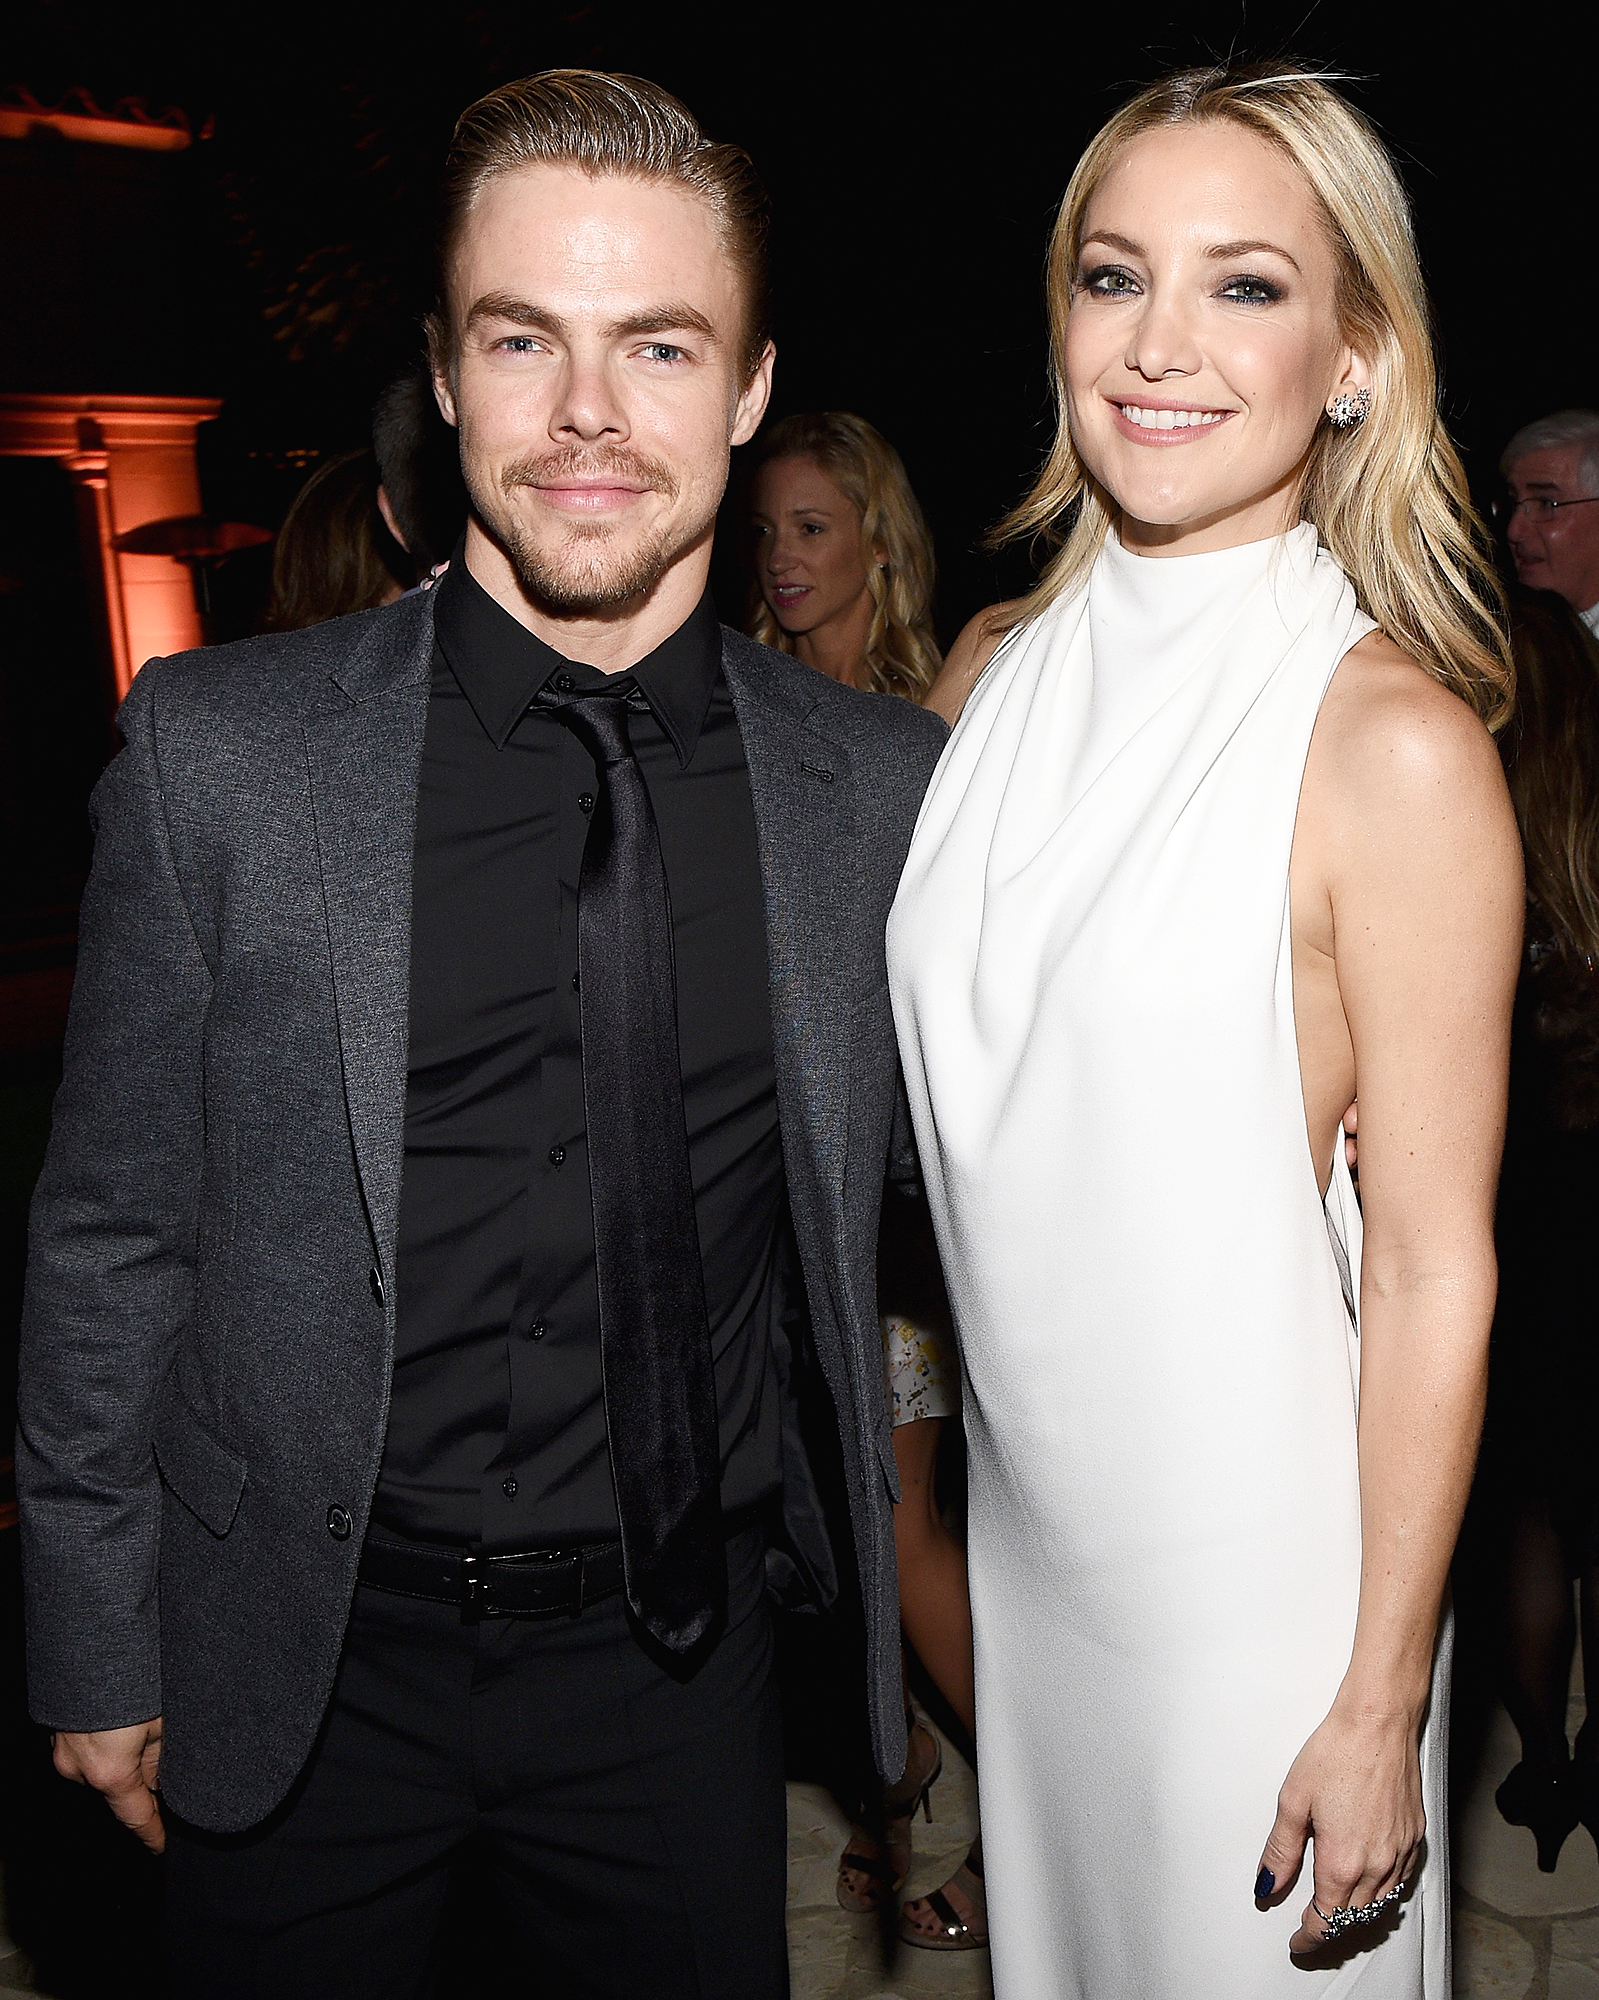 Kate Hudson’s Dating History A Timeline of Her Famous Exes Derek Hough